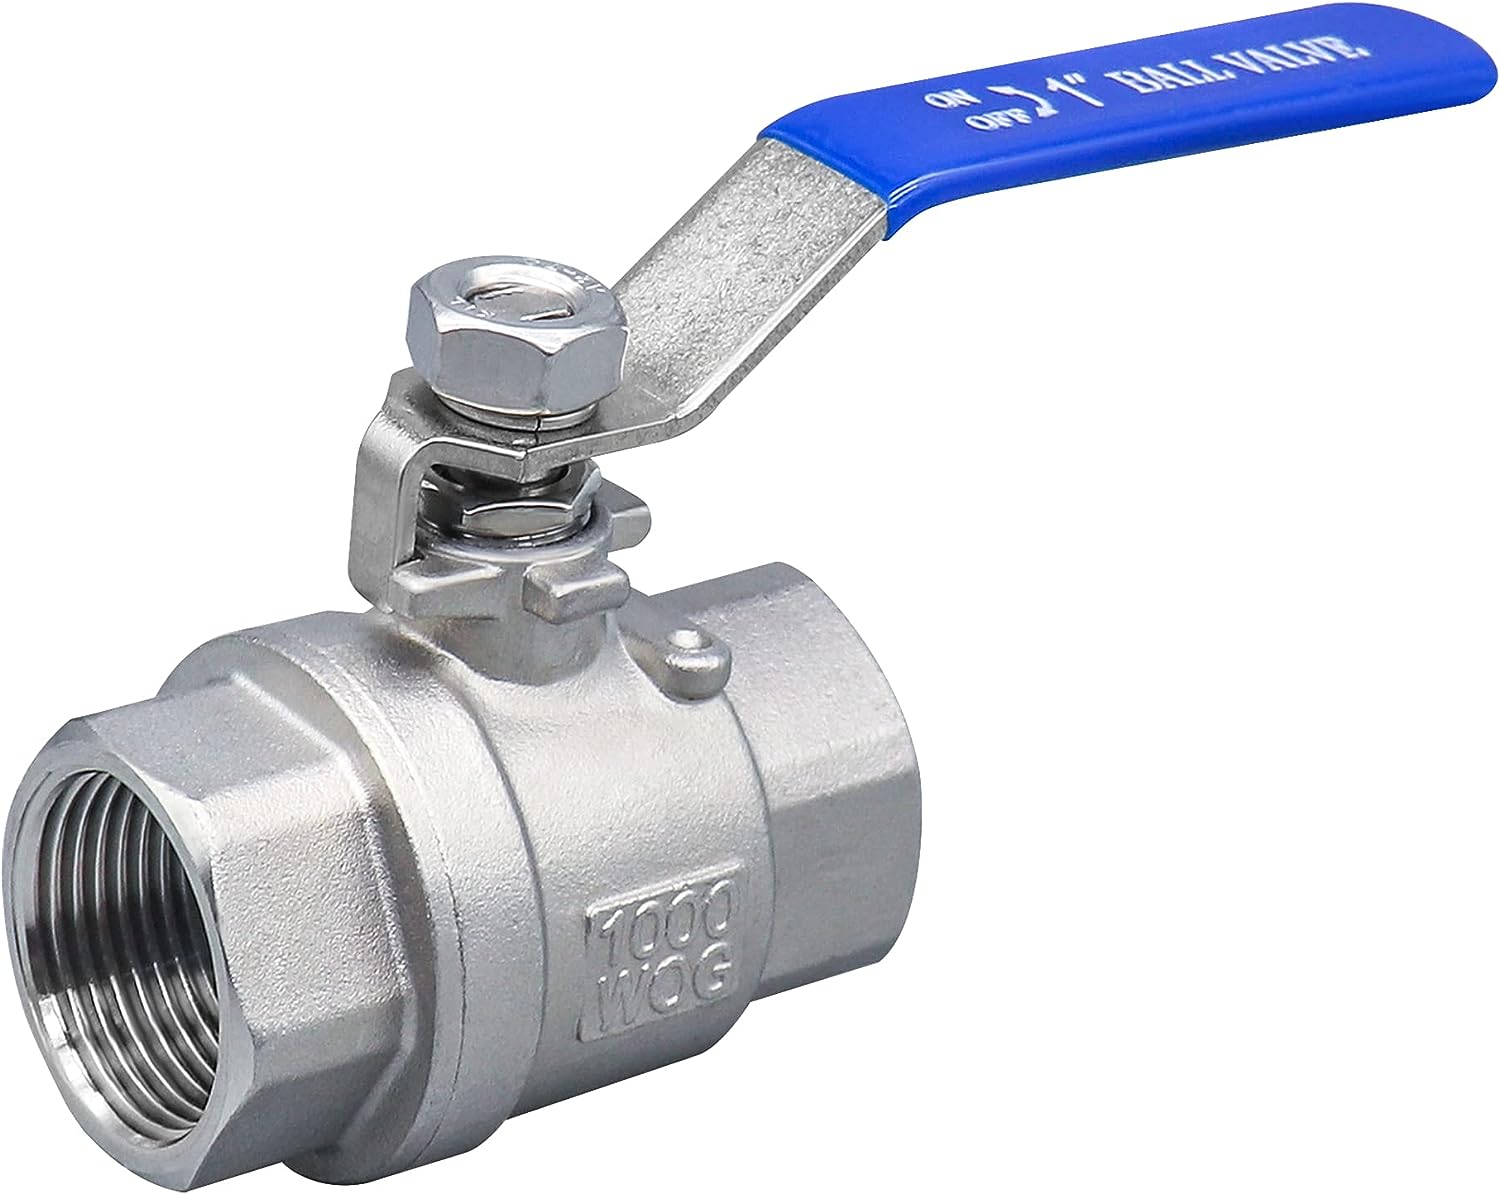 1/4" Inch NPT Stainless Steel 316 Ball Valve REDUCED Port 1000 WOG Lockable 